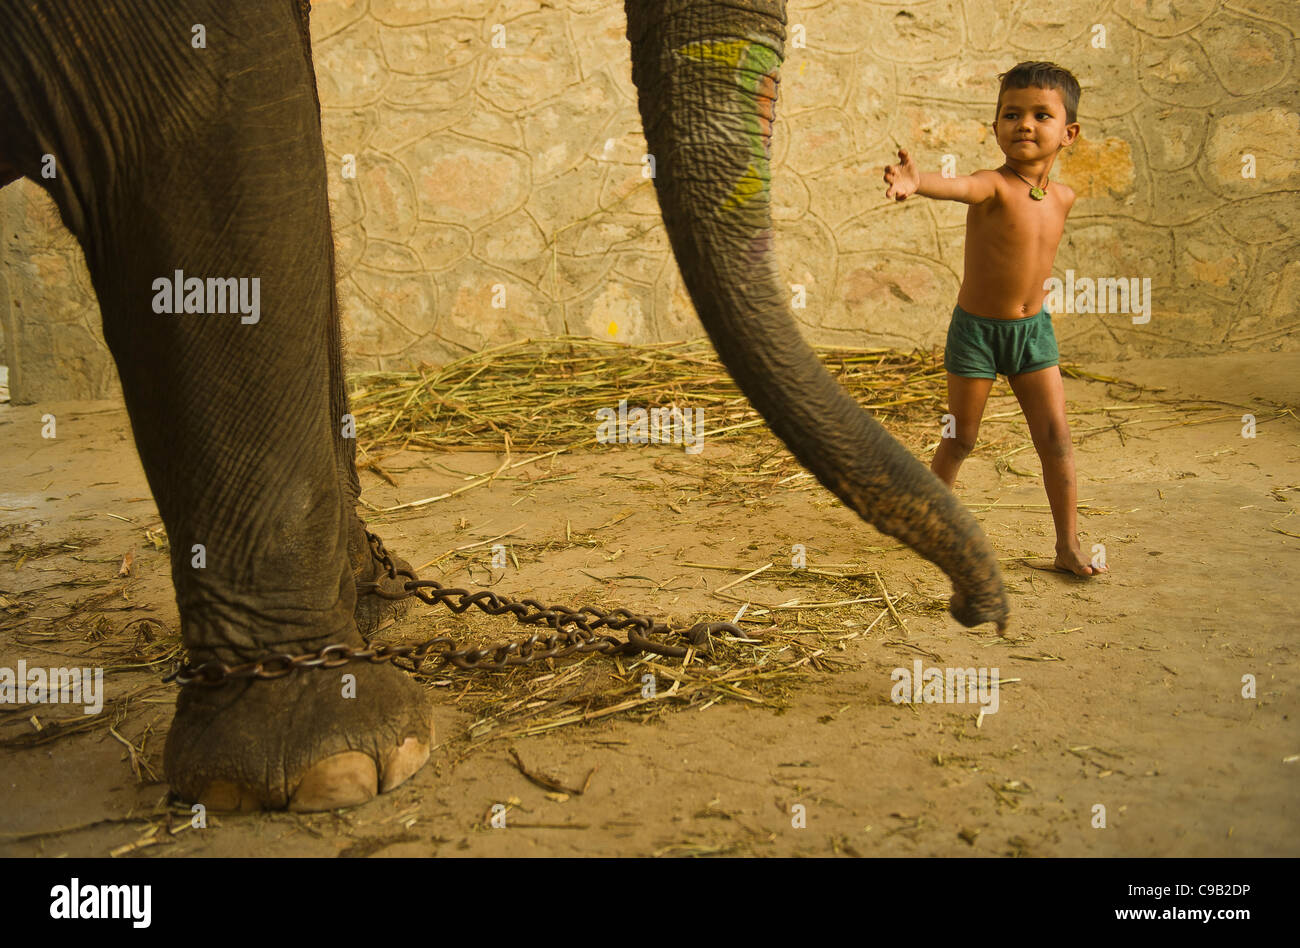 A child of a mahout, tries to touch an elephant that is used for tourists in Jaipur, Rajasthan, India. Stock Photo